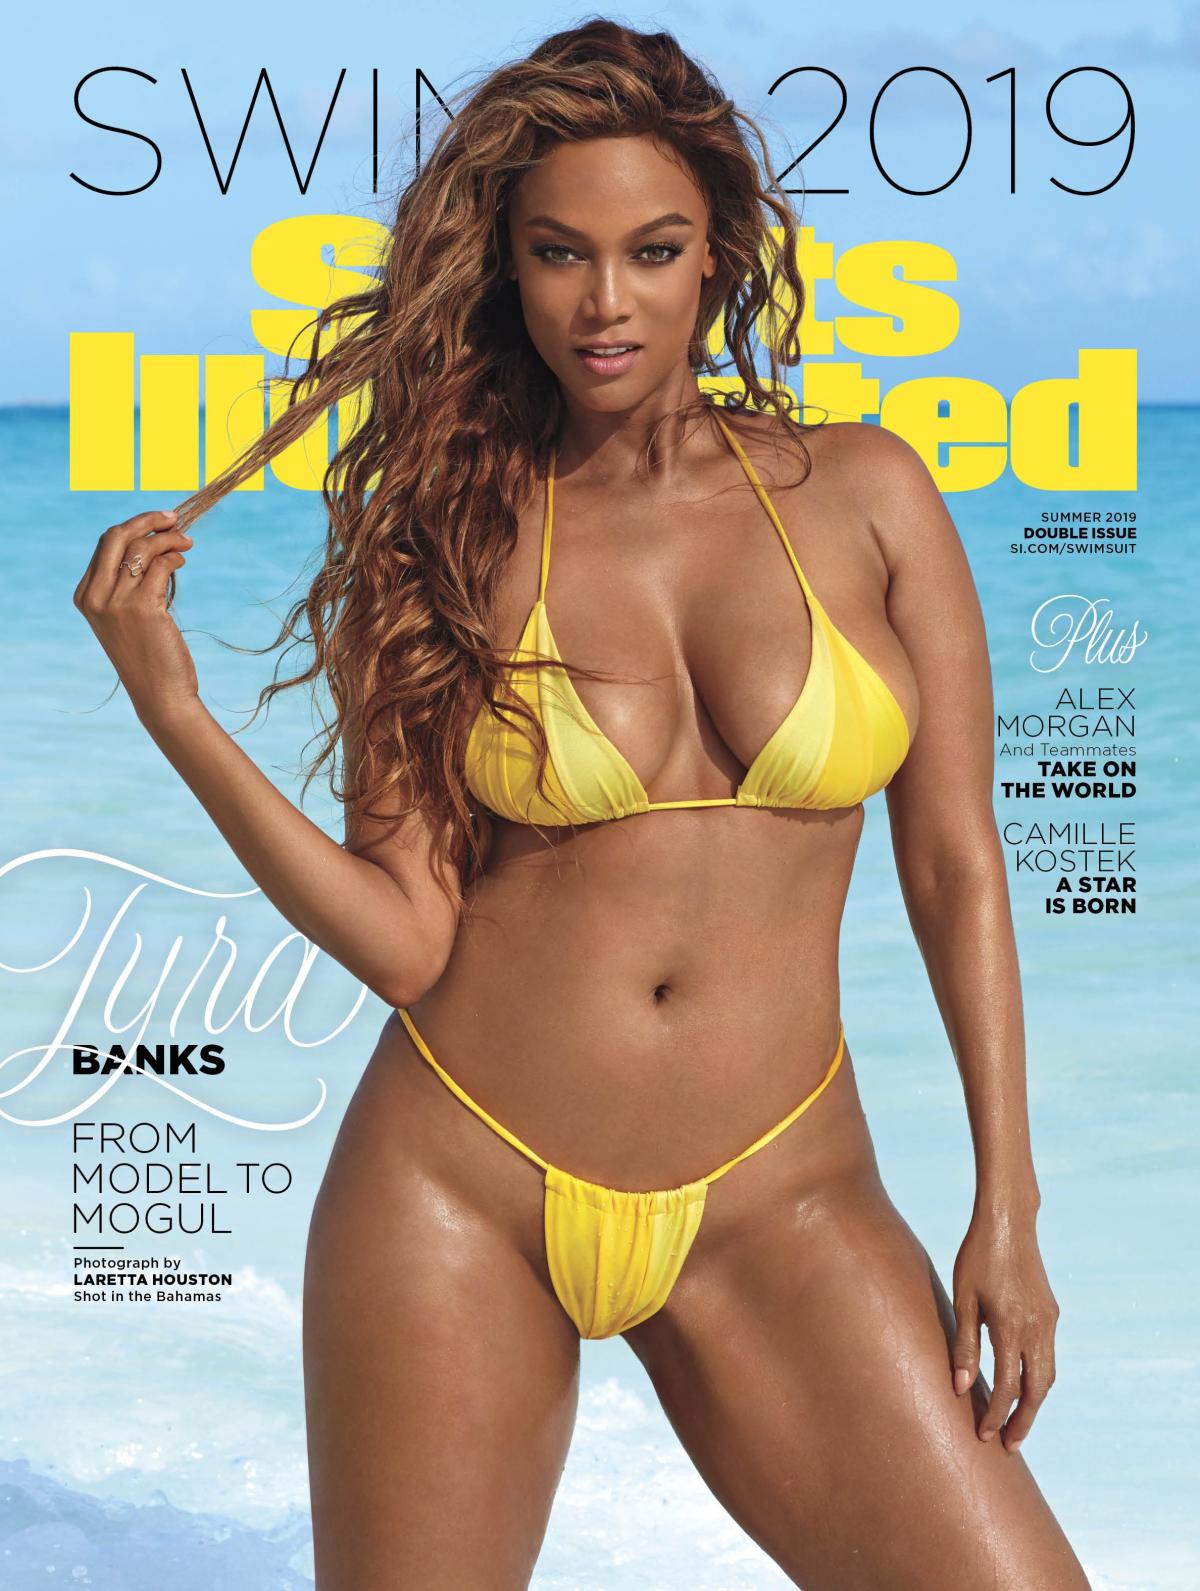 Sports Illustrated Swimsuit Models Guess How Many Bikinis They